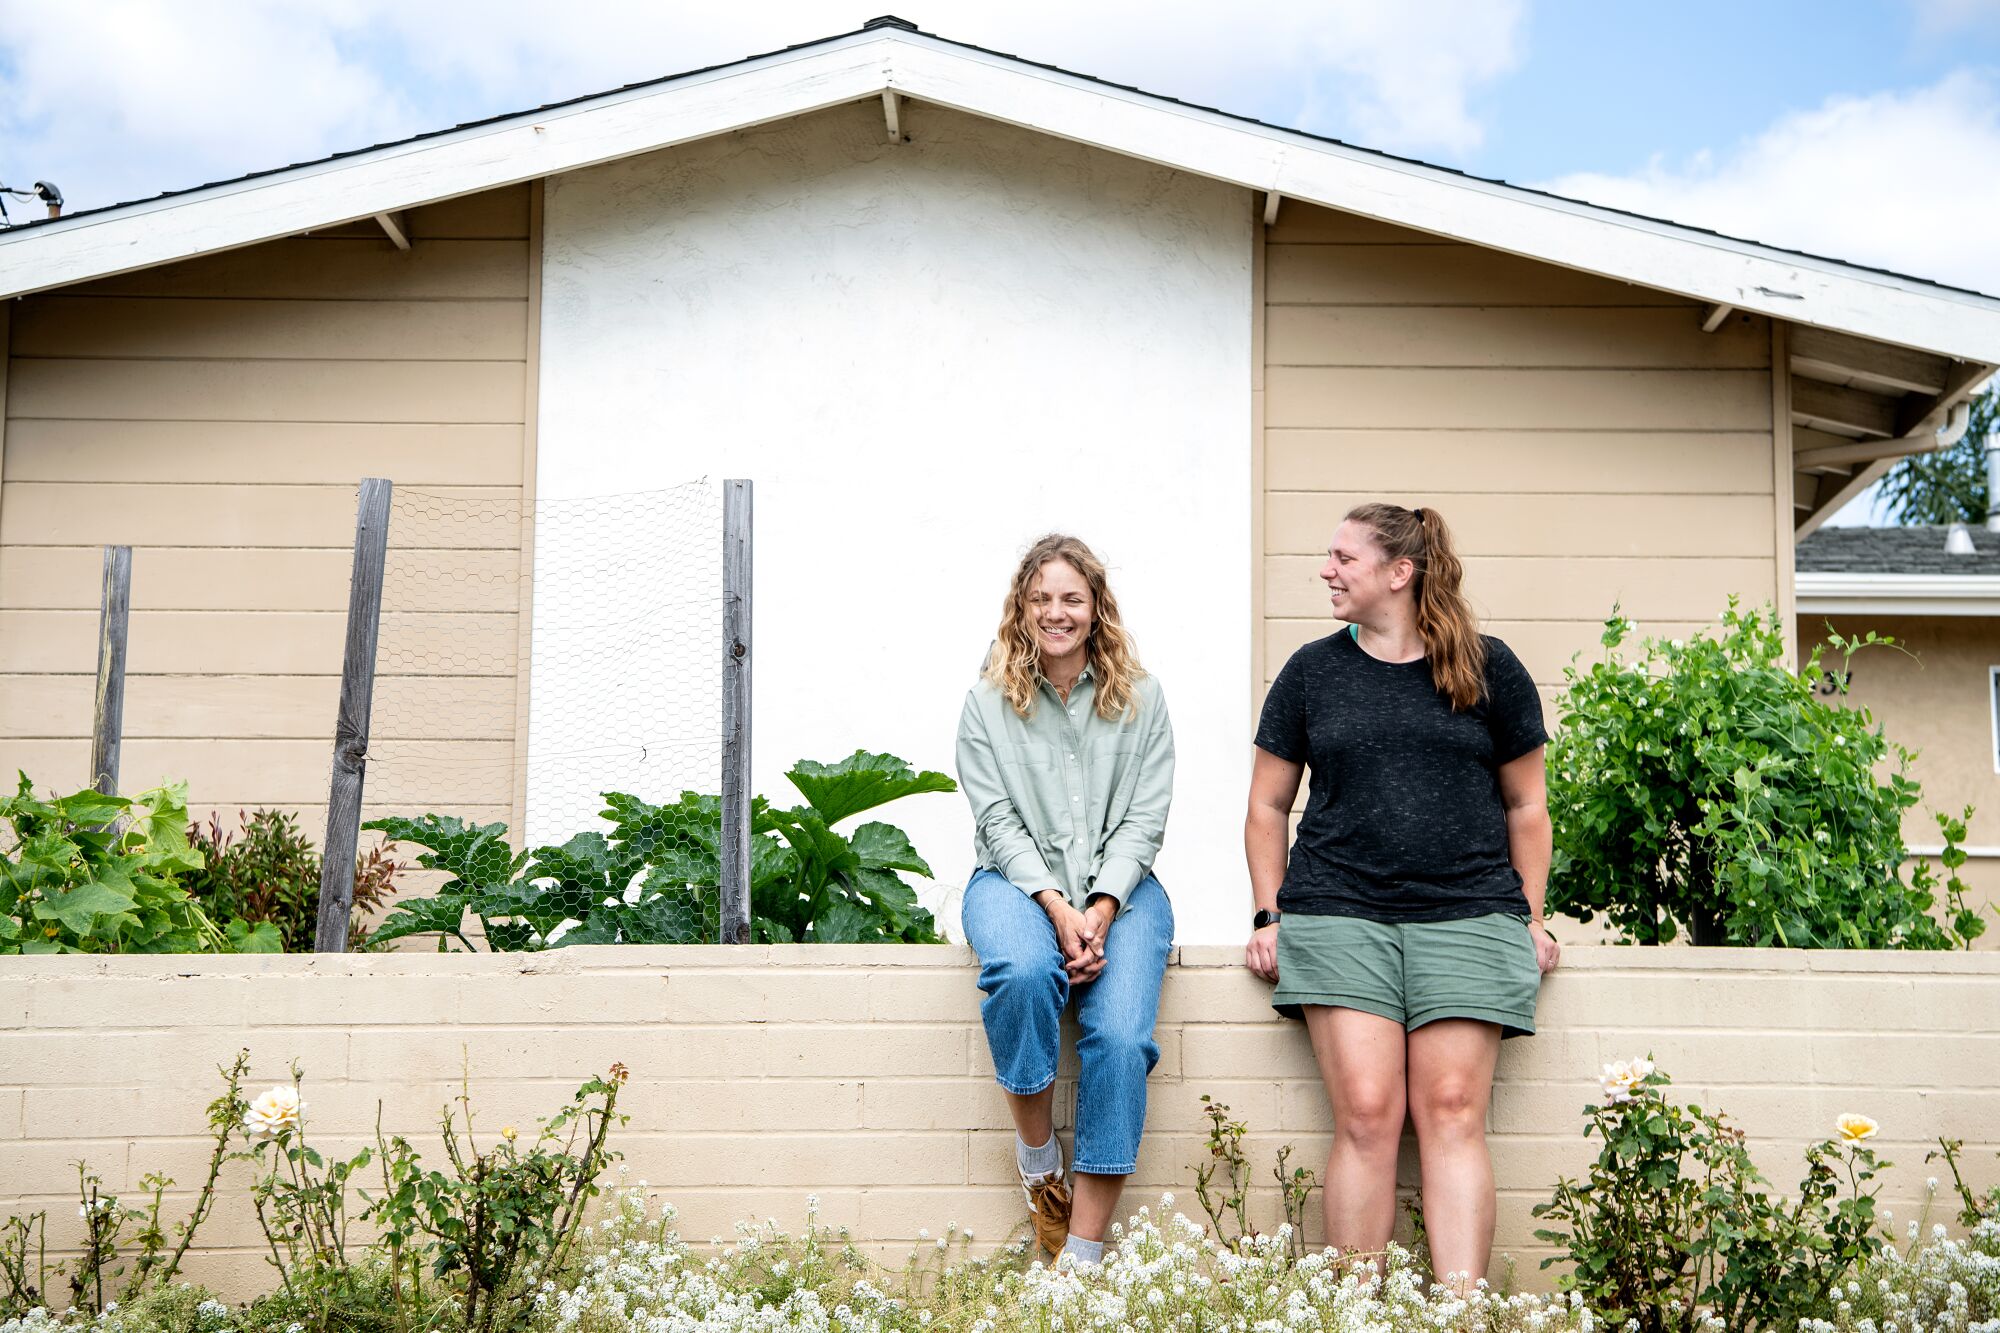 Rachel Nafis and Kristen Kellogg stand in a garden outside a house.